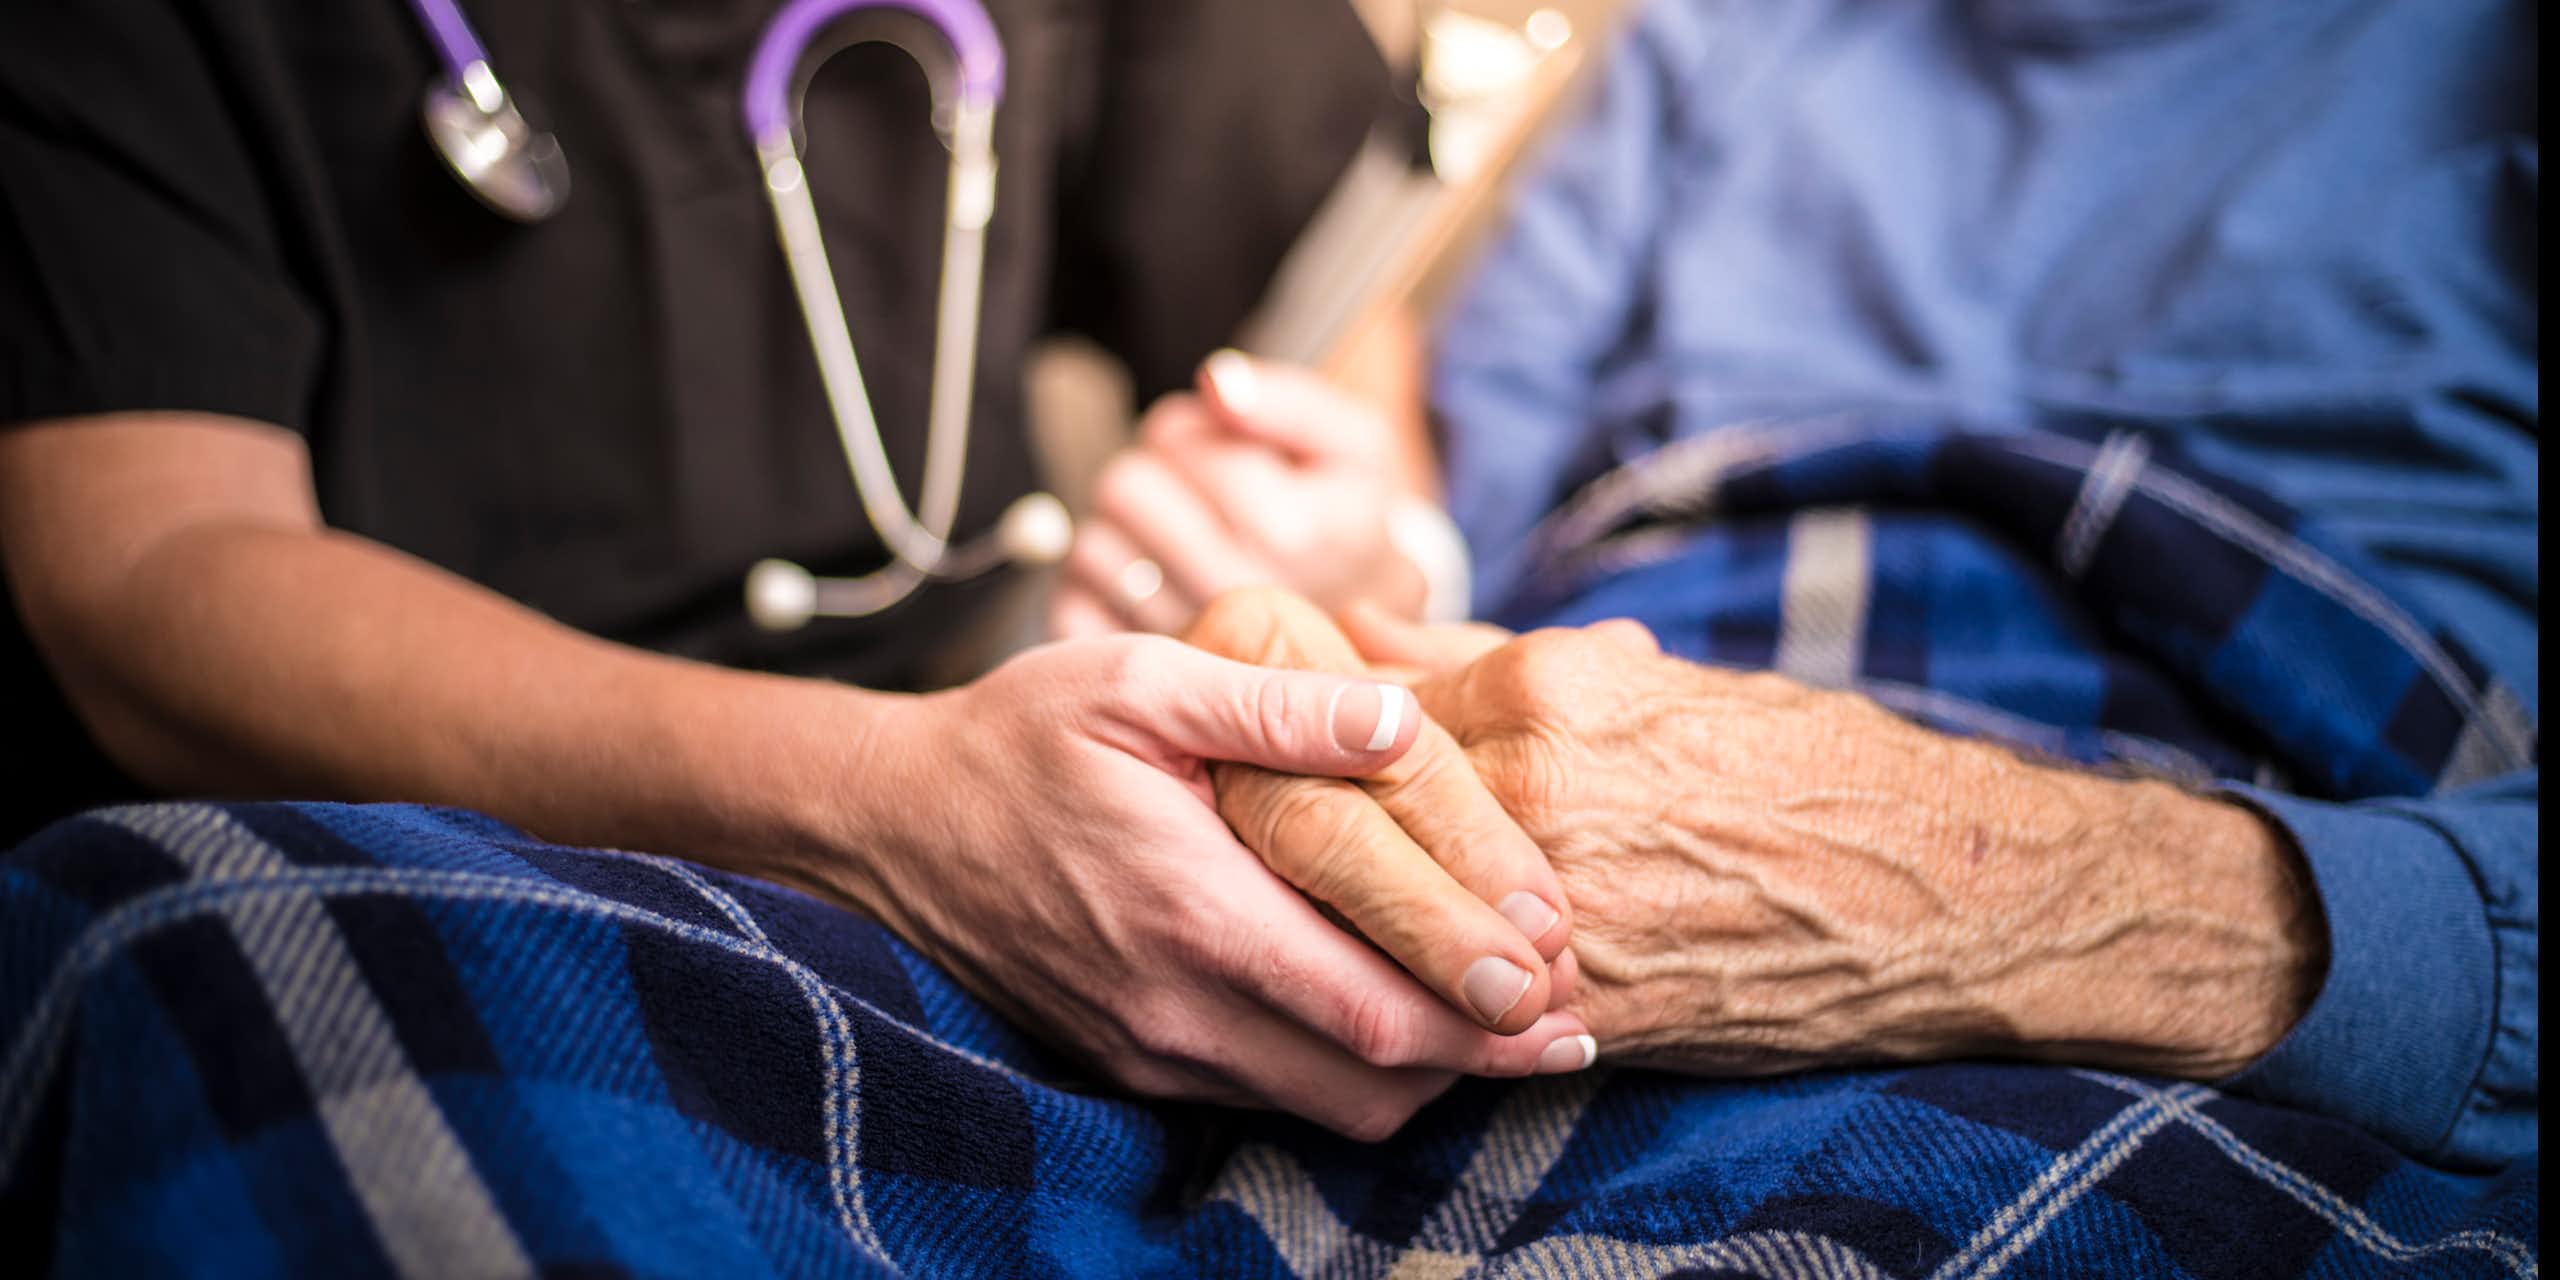 Hospice nurse holds the hands of an elderly male patient.